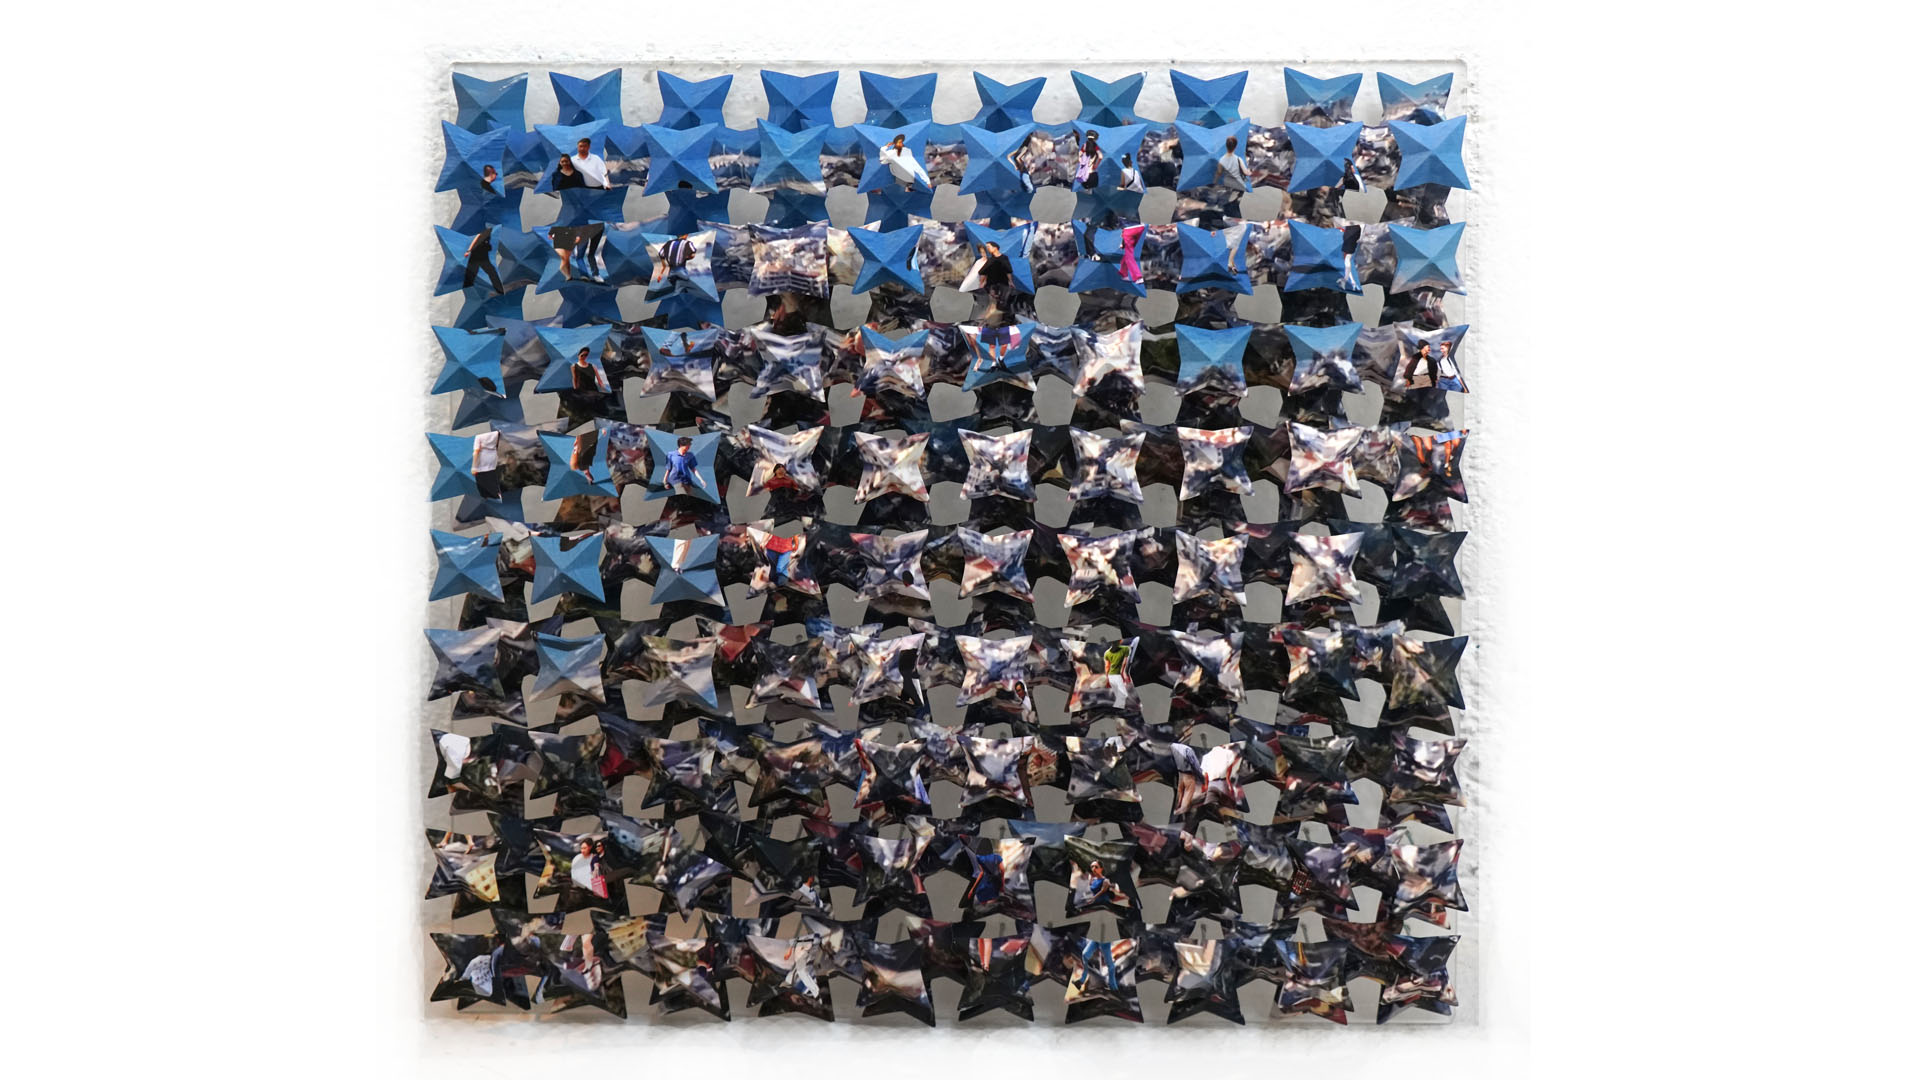 17  Nomads III 2021_Installation with fragments of photographs printing on backlight, on methacrvlate_50 × 50 cm copia.jpg